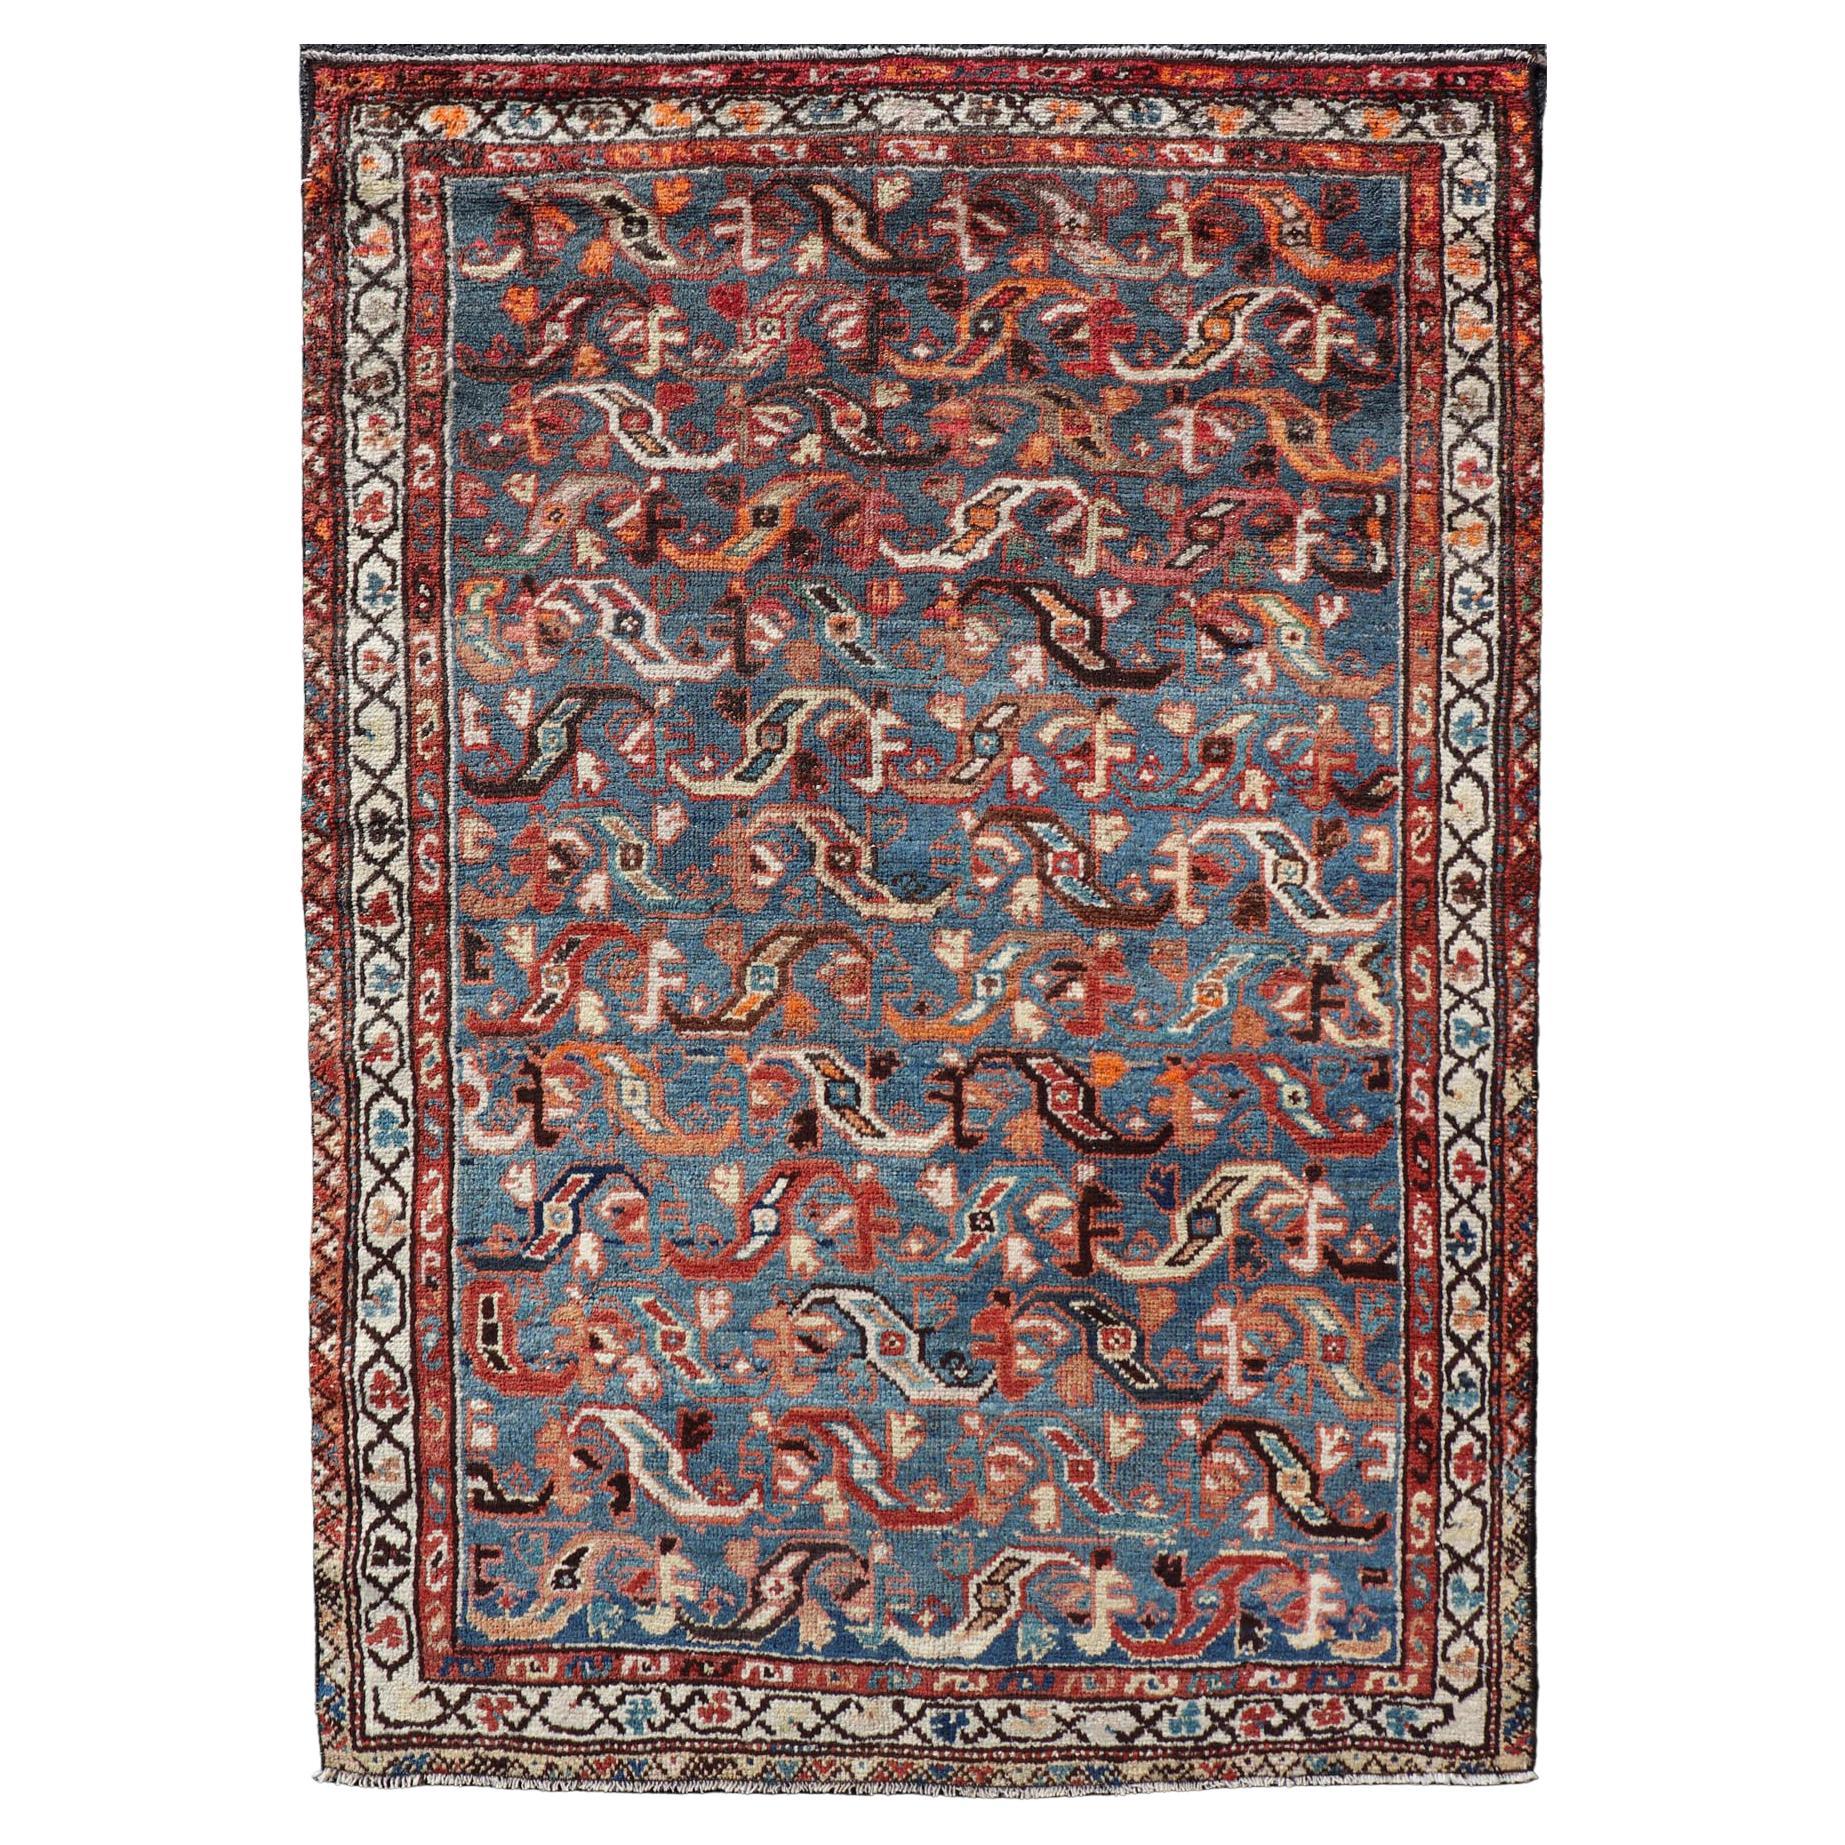 Antique Persian Malayer Rug with a Blue Field and Stylized Tribal Design